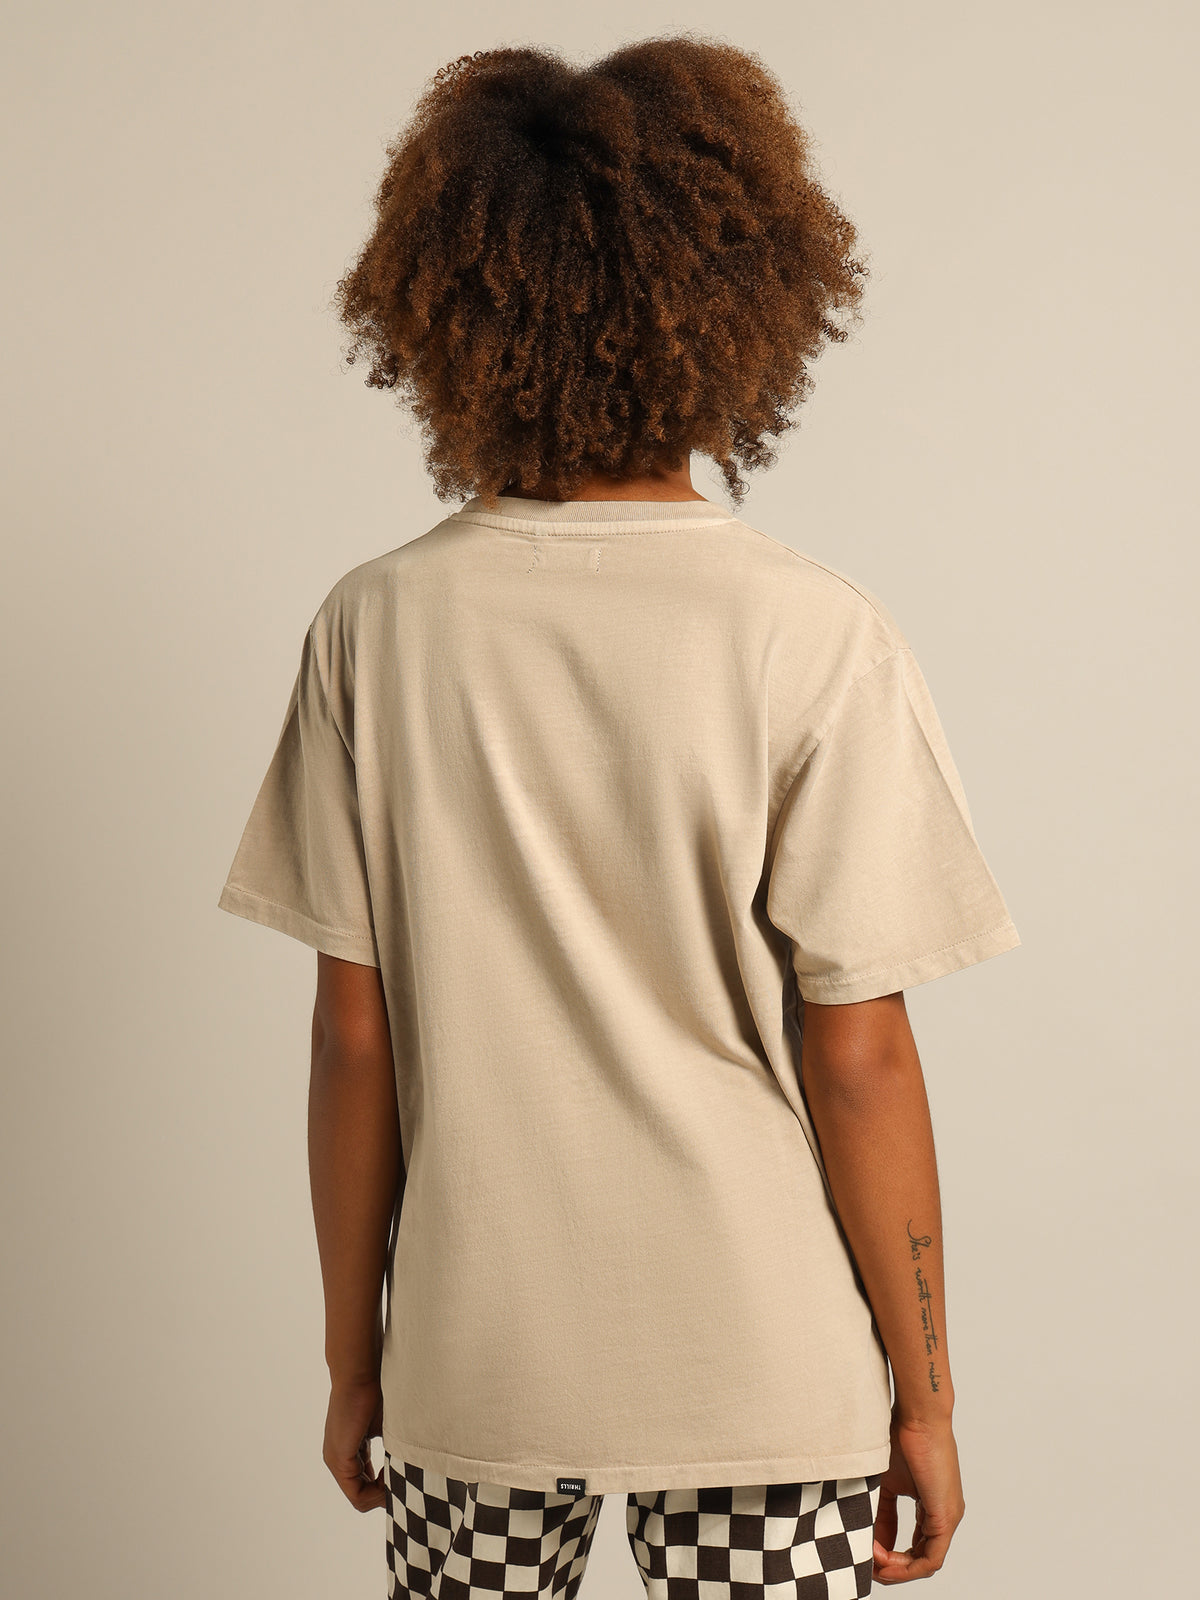 Alignment Merch Fit T-Shirt in Aged Tan